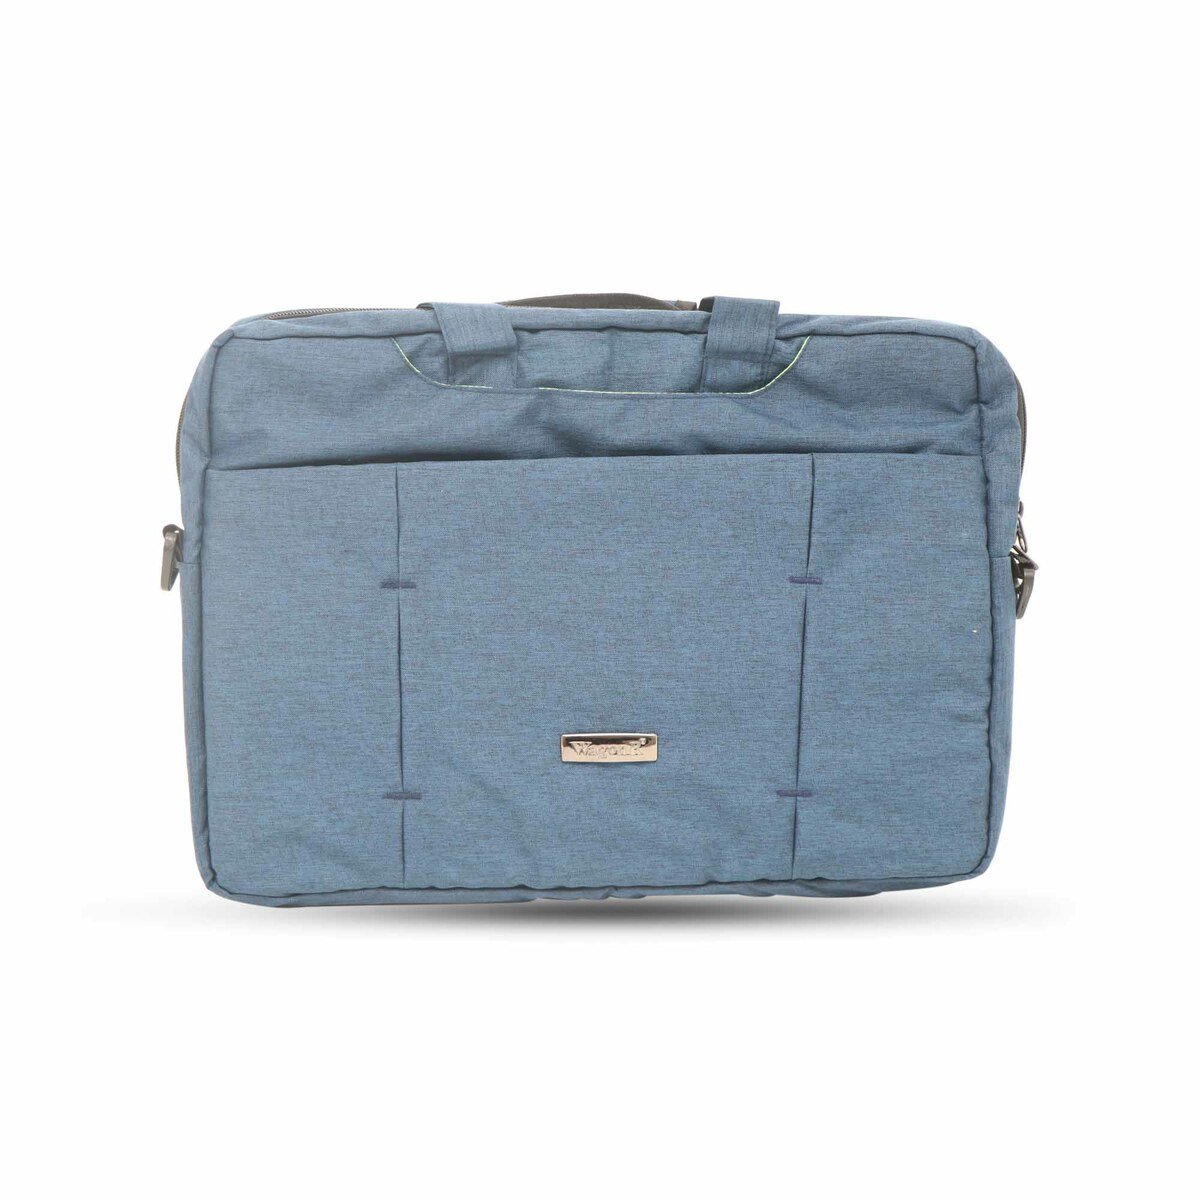 Wagon R Vibes Laptop Bag 5002 15.6in, Navy